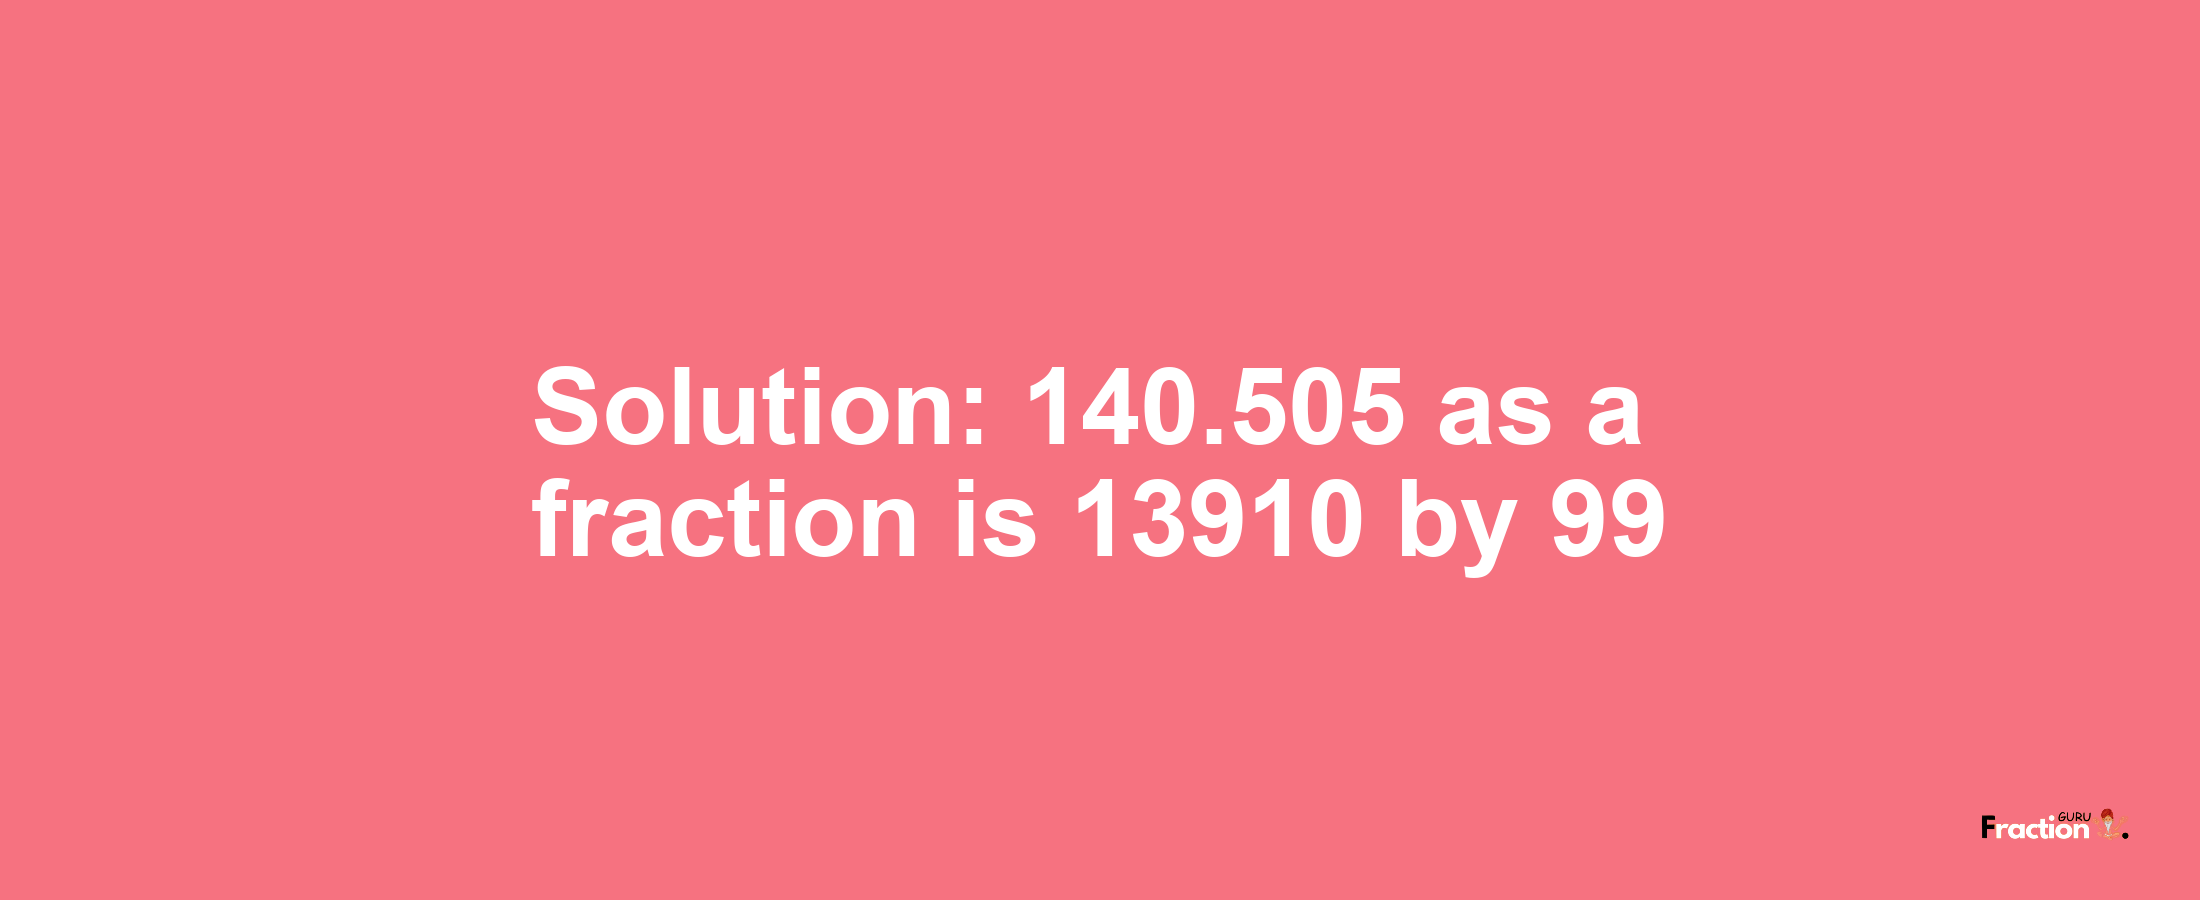 Solution:140.505 as a fraction is 13910/99